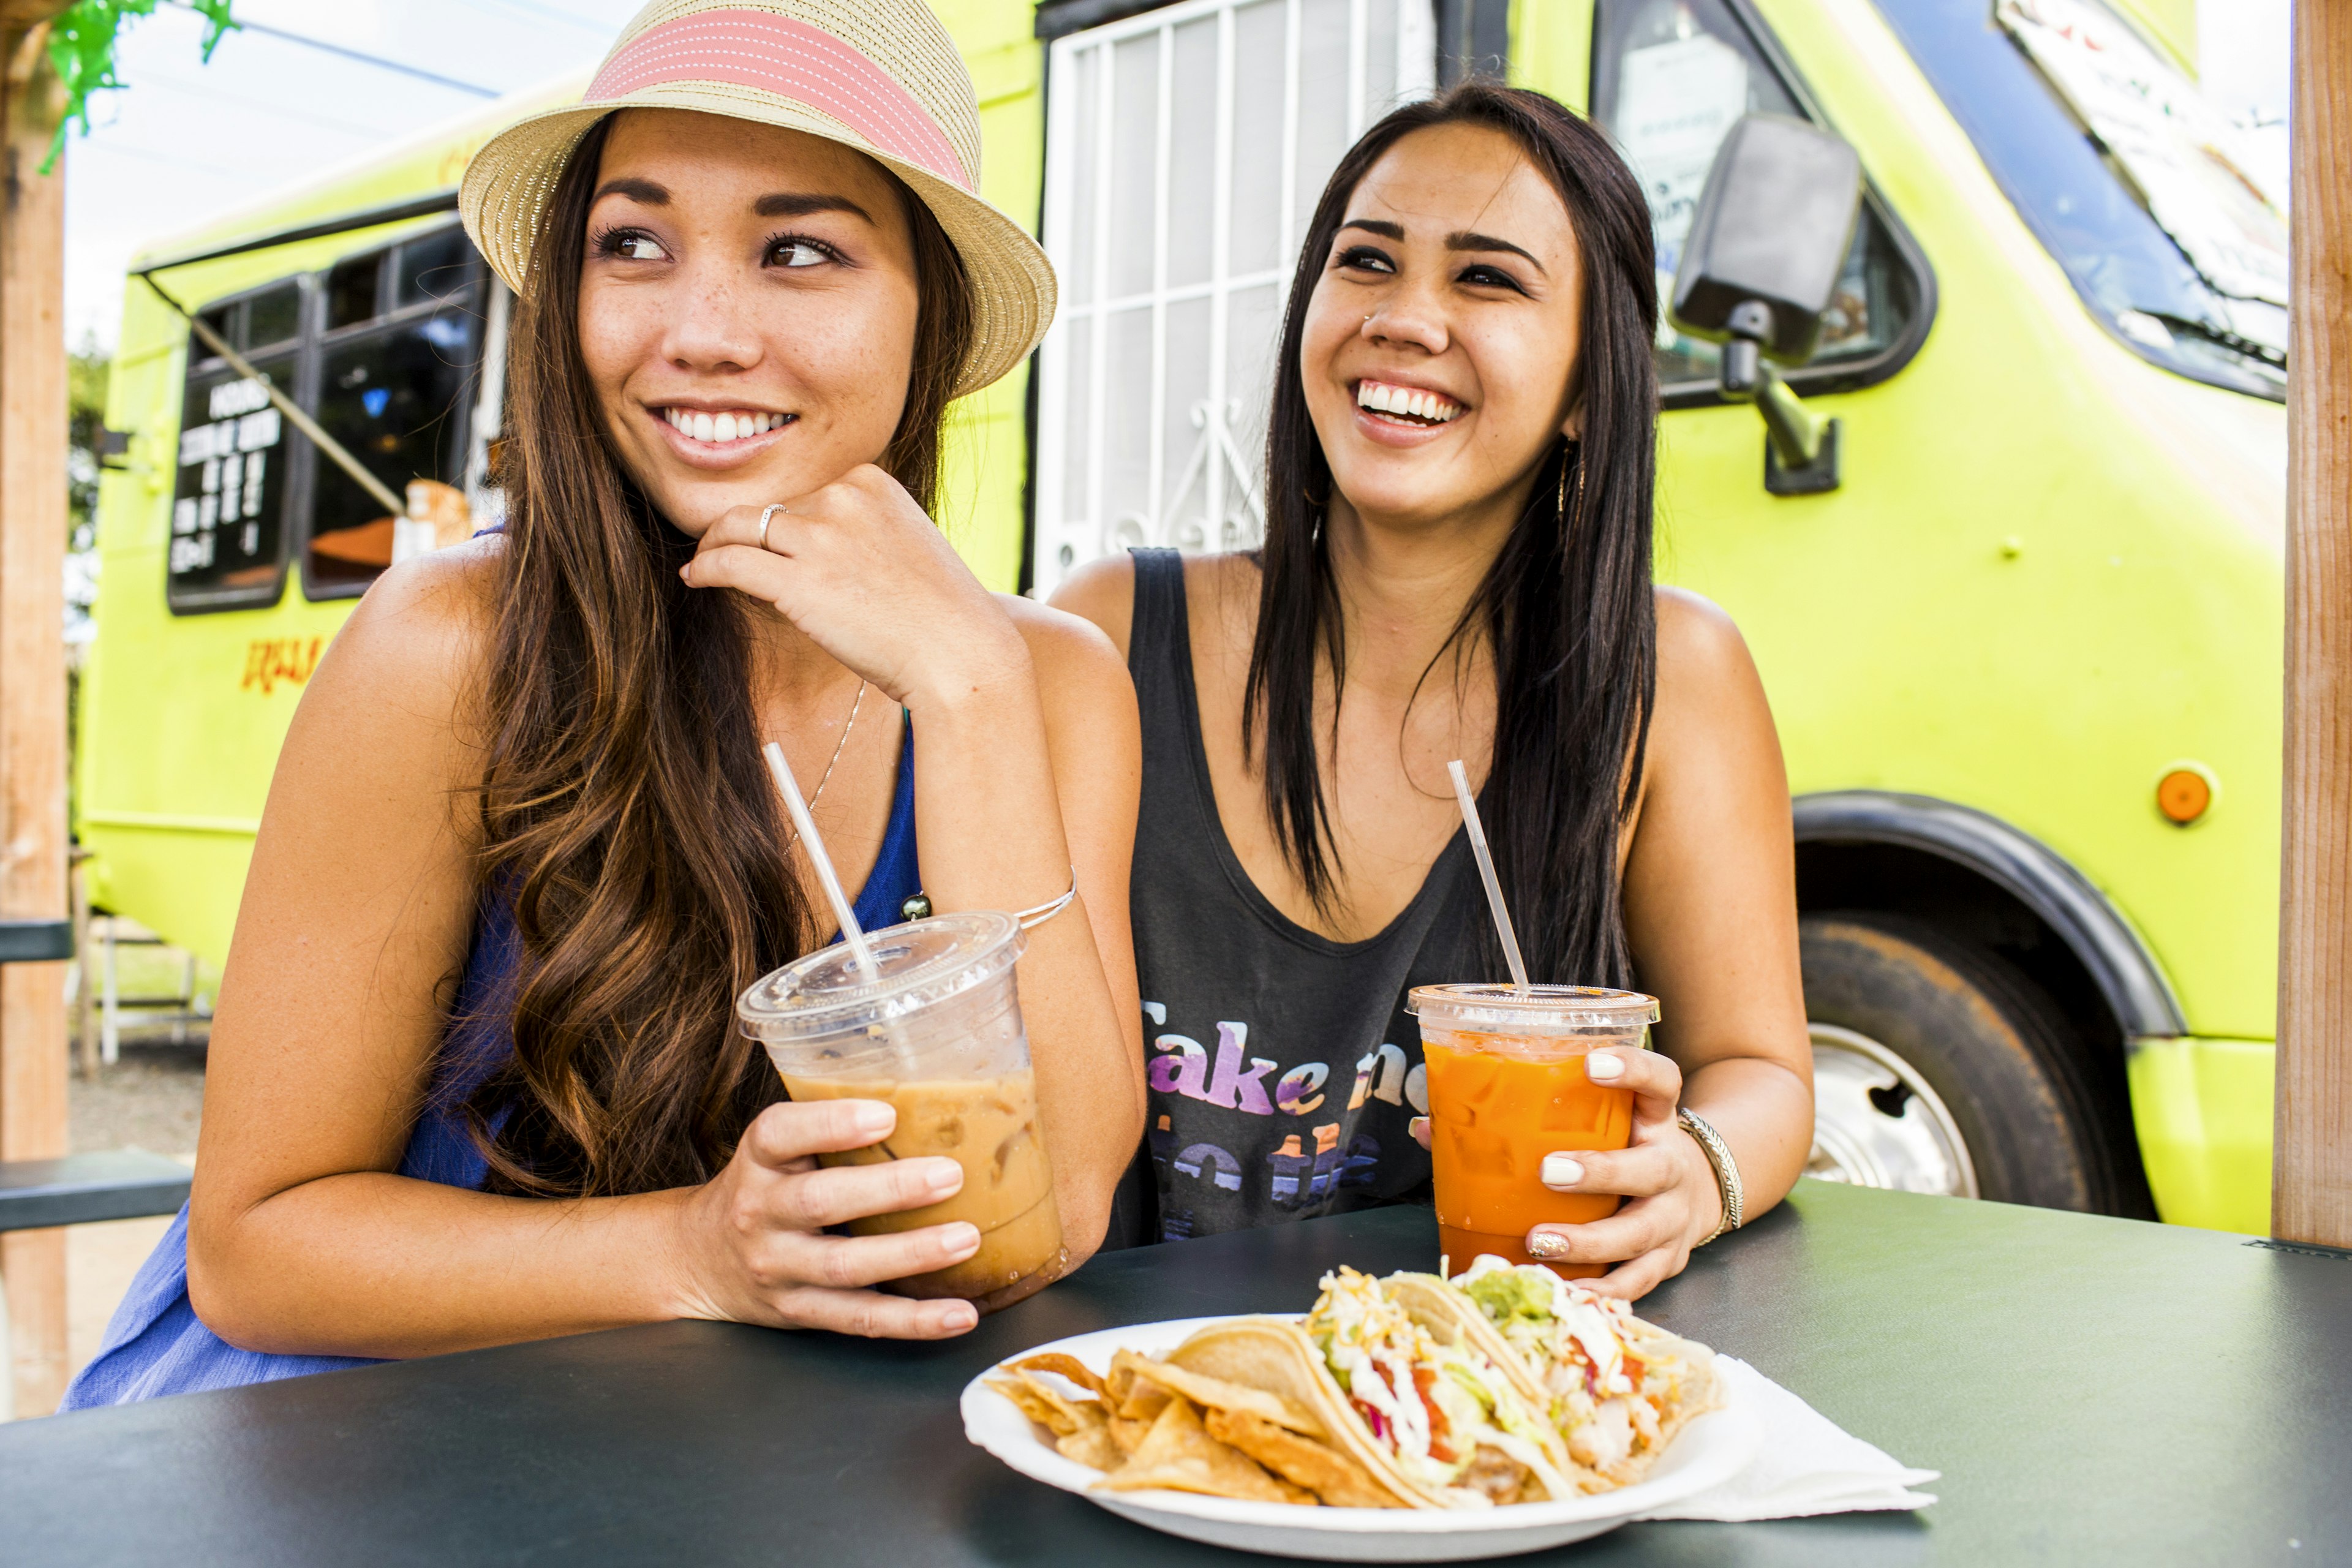 546821185
20-24 years, adventure, bonding, brunette, cart, color image, convenience, day, disposable cup, drinking, eating, enjoying, food and drink, food truck, friend, front view, girlfriend, happy, hat, Hawaii, head and shoulders, holding, horizontal, hungry, journey, laughing, leisure activity, lifestyle, long hair, looking away, outdoors, pacific islander ethnicity, people, photography, plastic cup, plate, Poipu, road trip, sitting, smiling, straw, summer, taco, take out food, tank-top, together, toothy smile, transportation, travel, truck, two people, United States, woman, young adult, young women
Pacific Islander women eating and drinking near food cart - stock photo